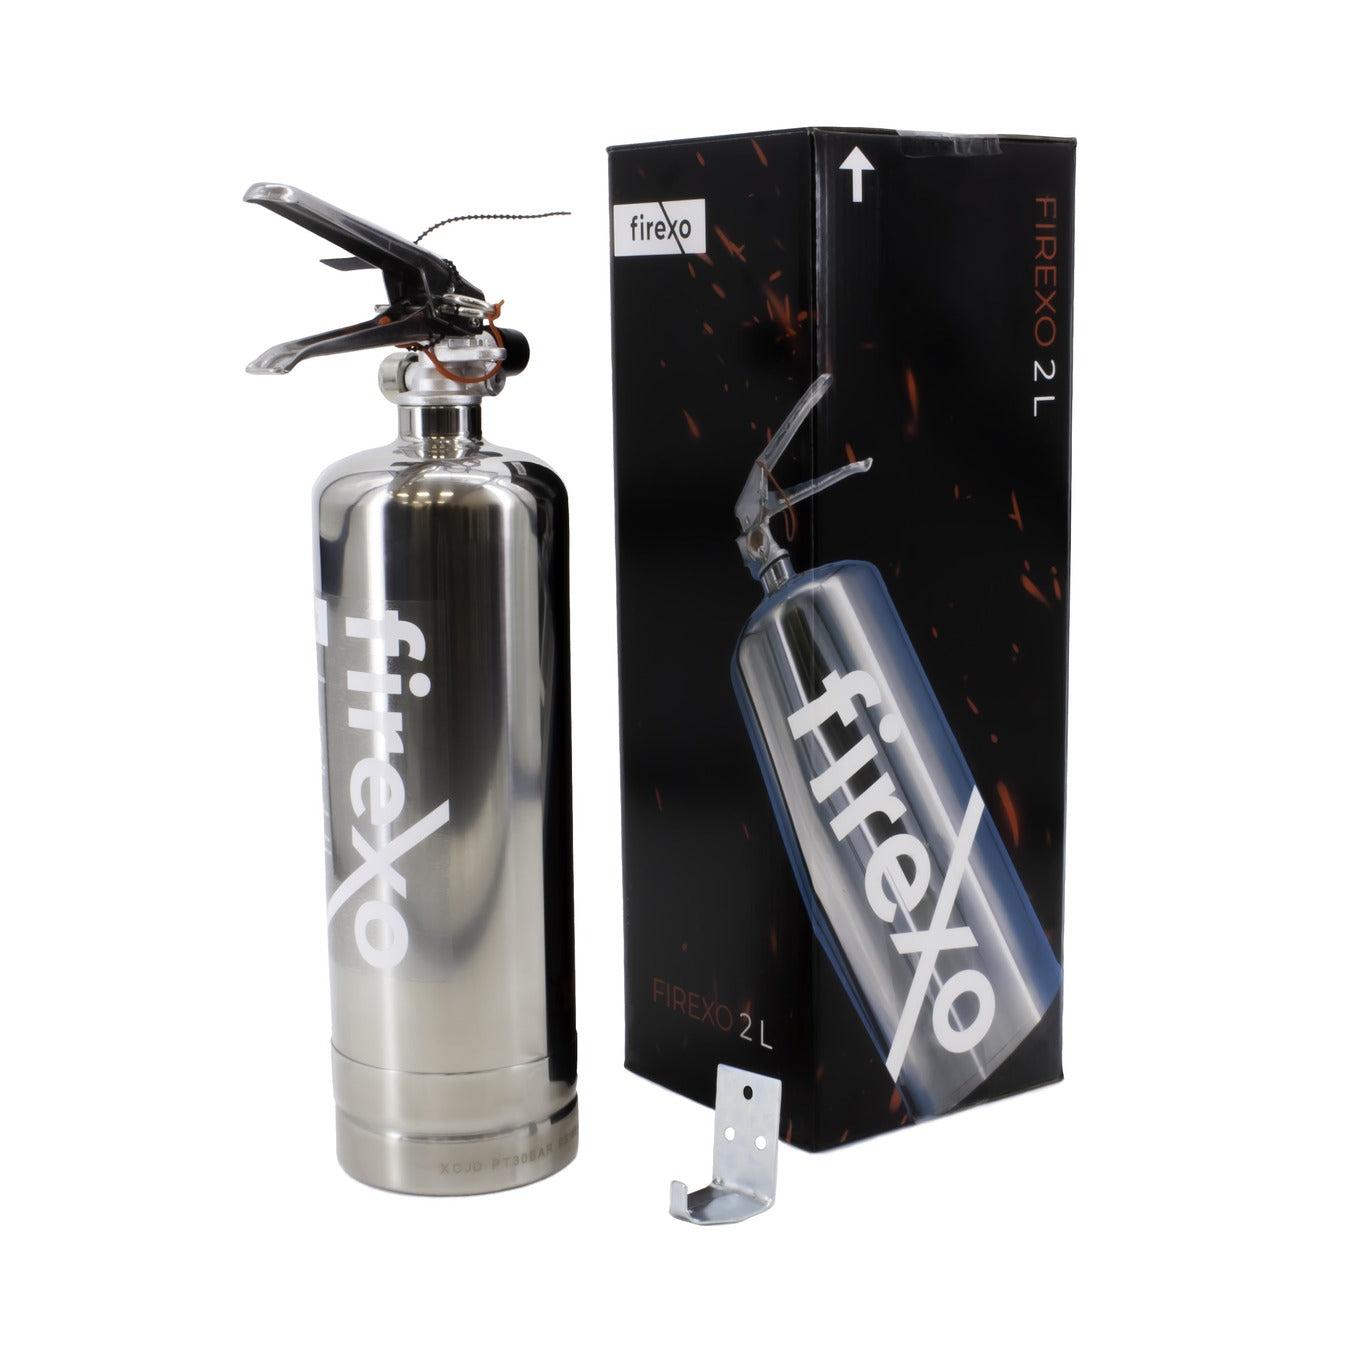 Firexo Stainless Steel 2 Litre Fire Extinguisher